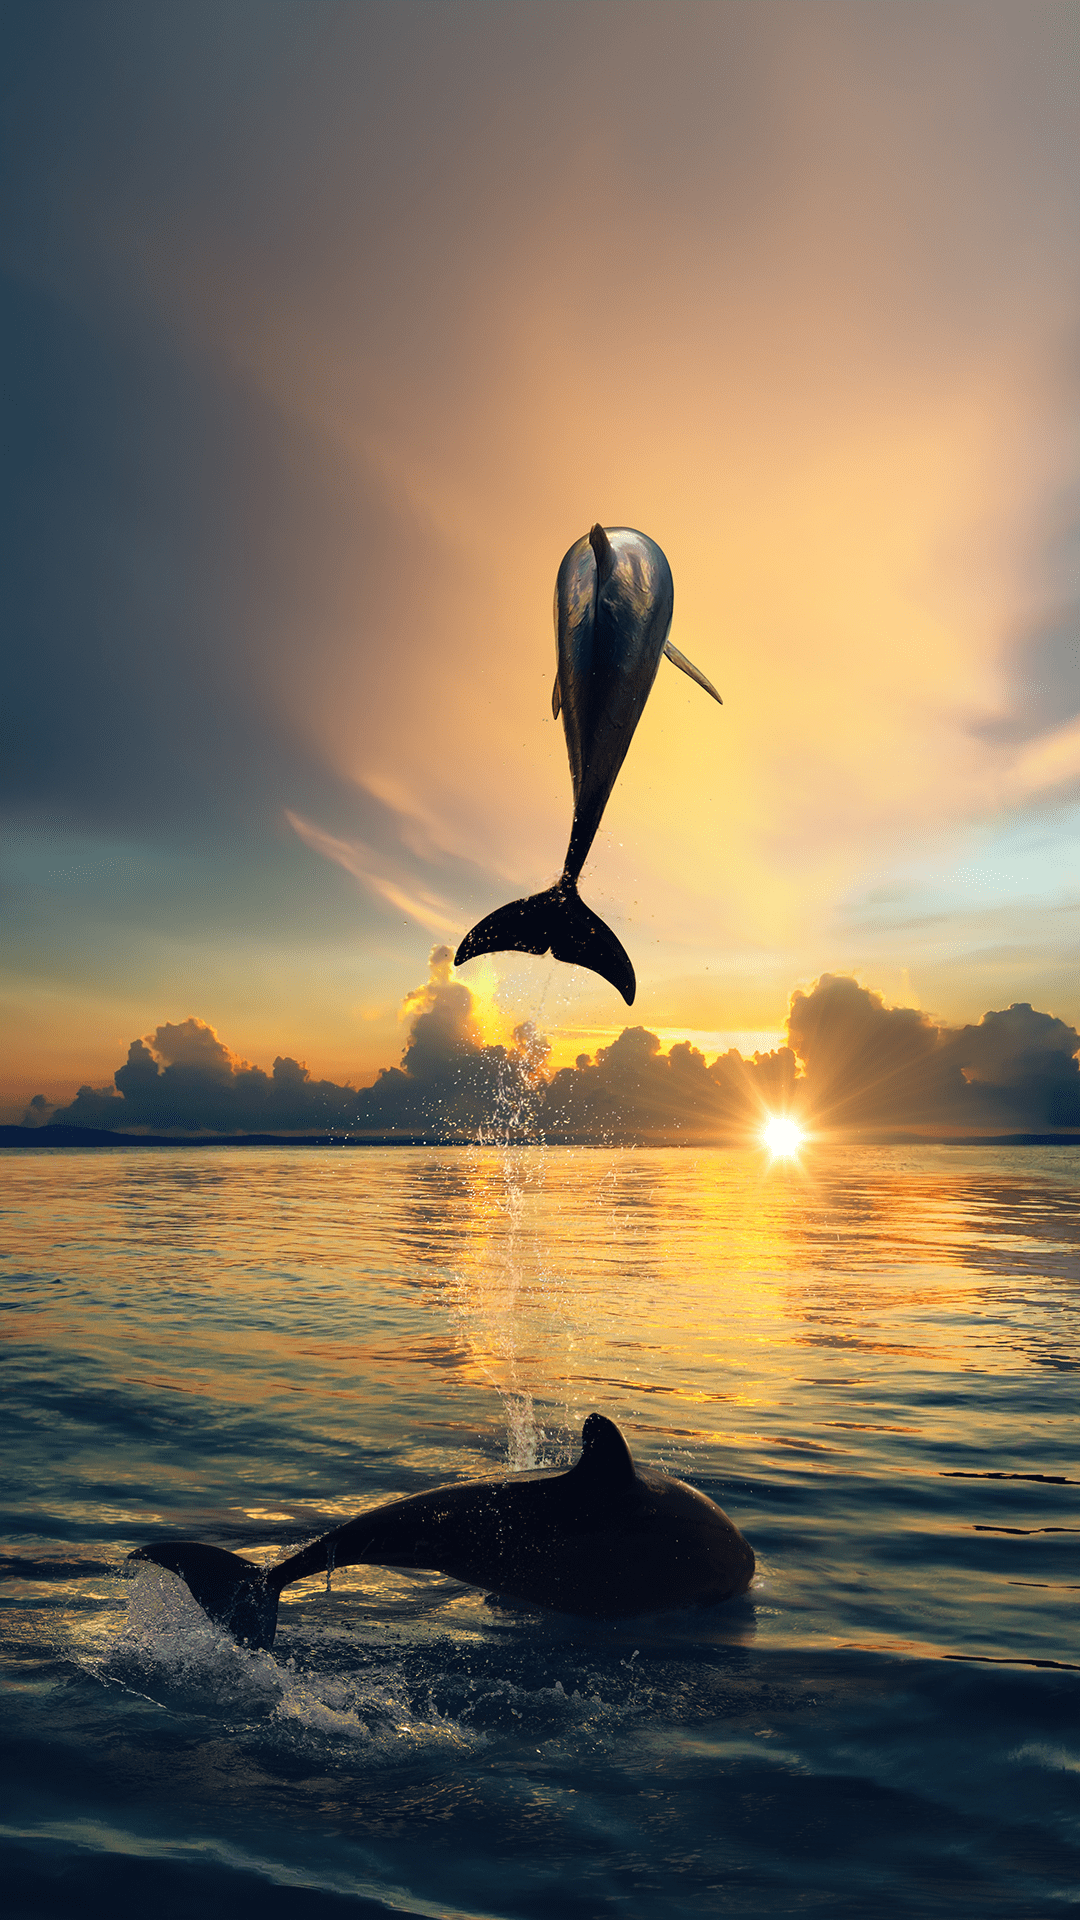 Aggregate more than 80 dolphin iphone wallpaper best - in.cdgdbentre